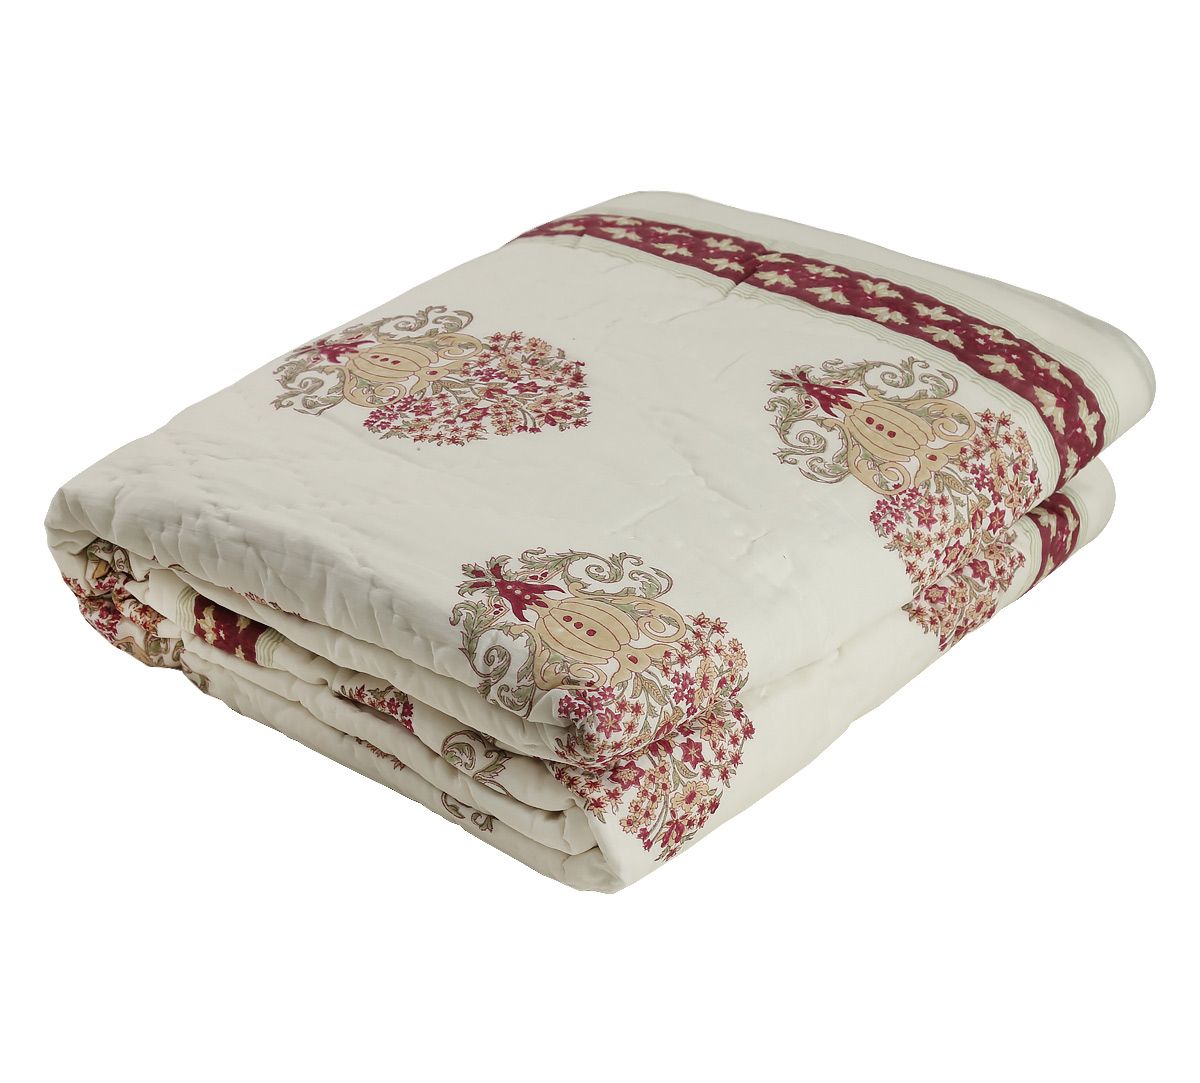 India Circus by Krsnaa Mehta Baroque Floral Single Bed Quilted Rajai